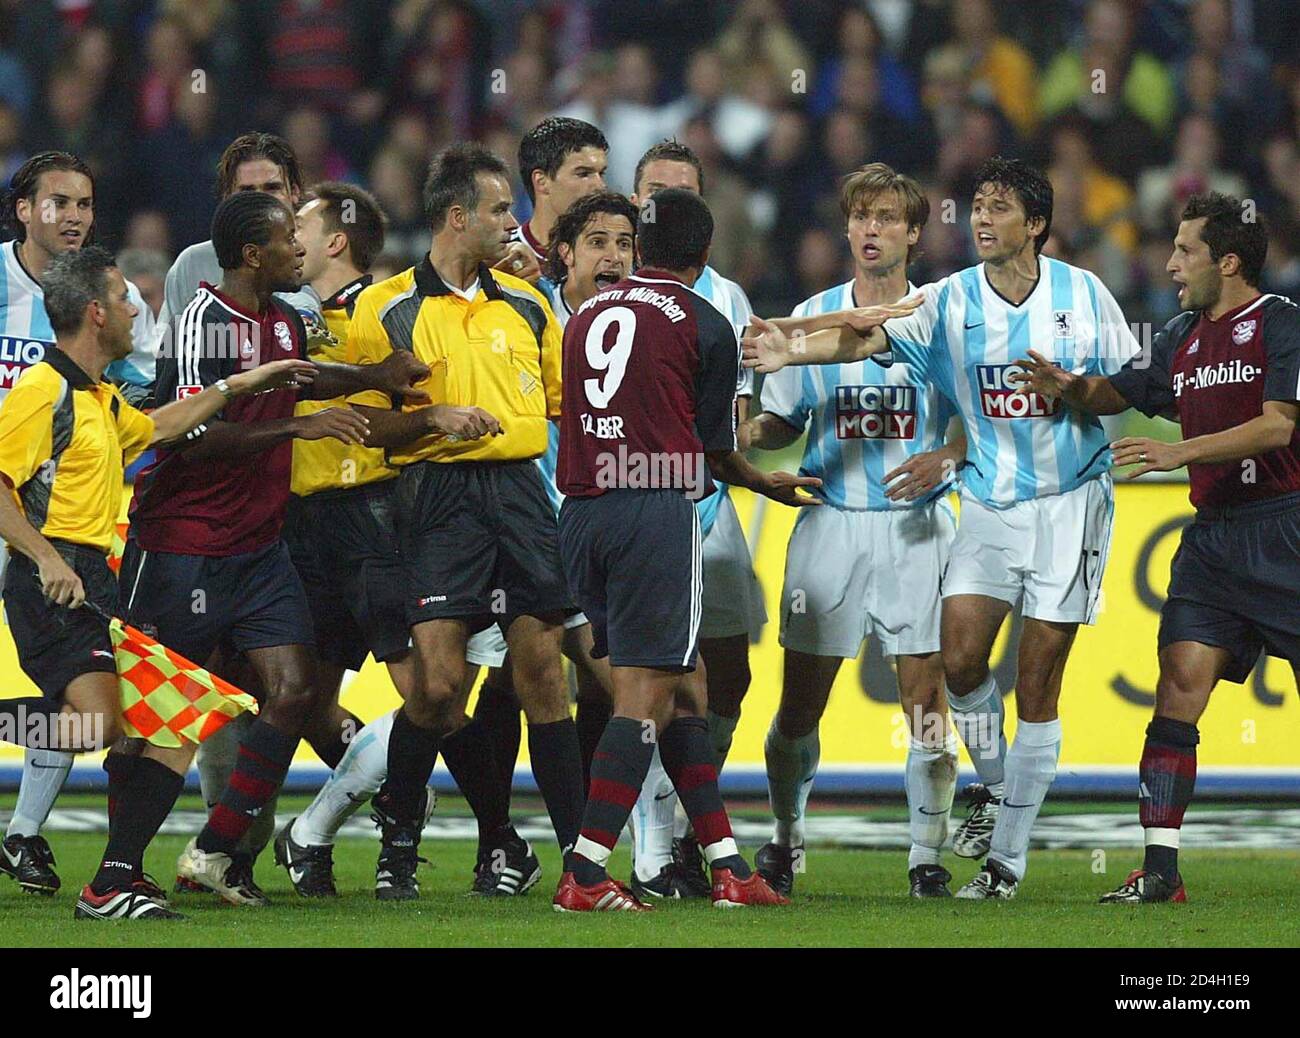 Bayern Munich's Brazilian forwarder Giovanne Elber (C,No9) argues with Harald Cerny (3rdR) and Daniel Borimirov of 1860 Munich while referees try to seperate the players during the 195th prestigious match of both Munich clubs in Munich's Olympic stadium, September 10, 2002. REUTERS/Kai Pfaffenbach REUTERS ADVISES THAT ACCORDING TO THE DFL THIS IMAGE CAN NOT BE PUBLISHED ONLINE OR ON A MOBILE PLATFORM FOR THE DURATION OF THIS GAME WITHOUT ITS AUTHORITY. PLEASE CONTACT THE DFL DIRECTLY FOR FURTHER INFORMATION REUTERS  KP/WS Stock Photo